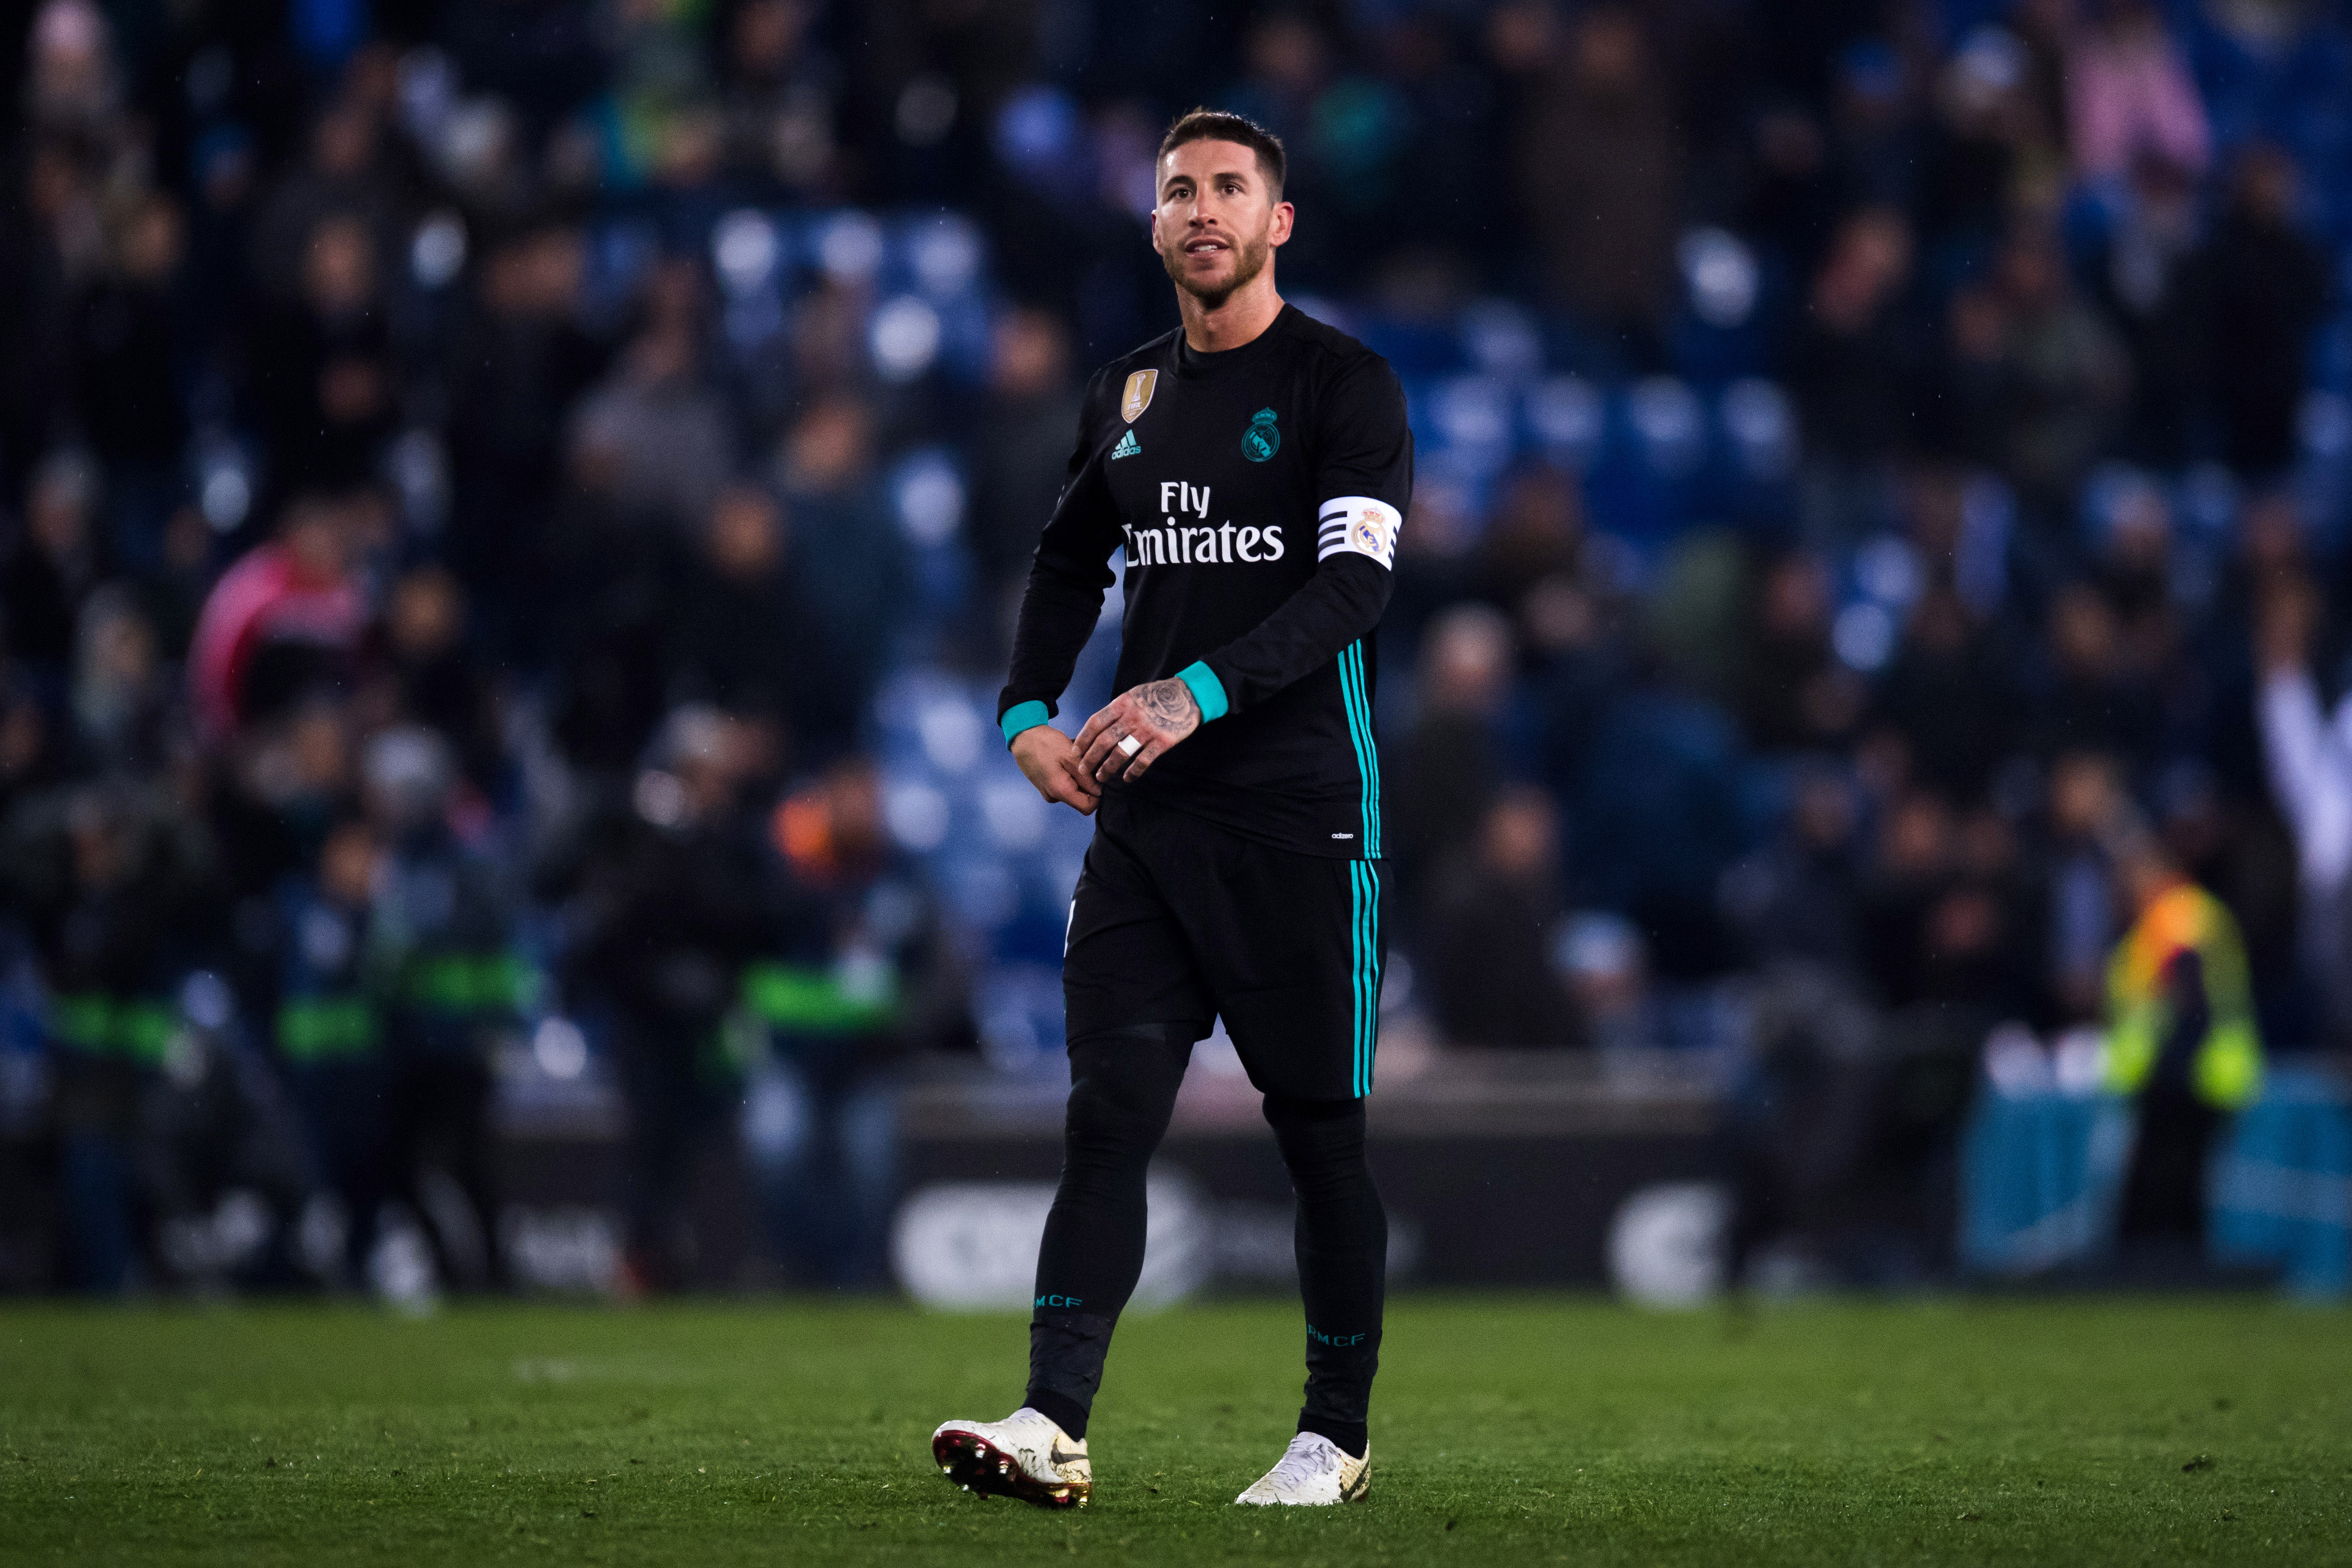 BARCELONA, SPAIN - FEBRUARY 27:  Sergio Ramos of Real Madrid CF reacts after defeat after the La Liga match between Espanyol and Real Madrid at RCDE Stadium on February 27, 2018 in Barcelona, Spain.  (Photo by Alex Caparros/Getty Images )